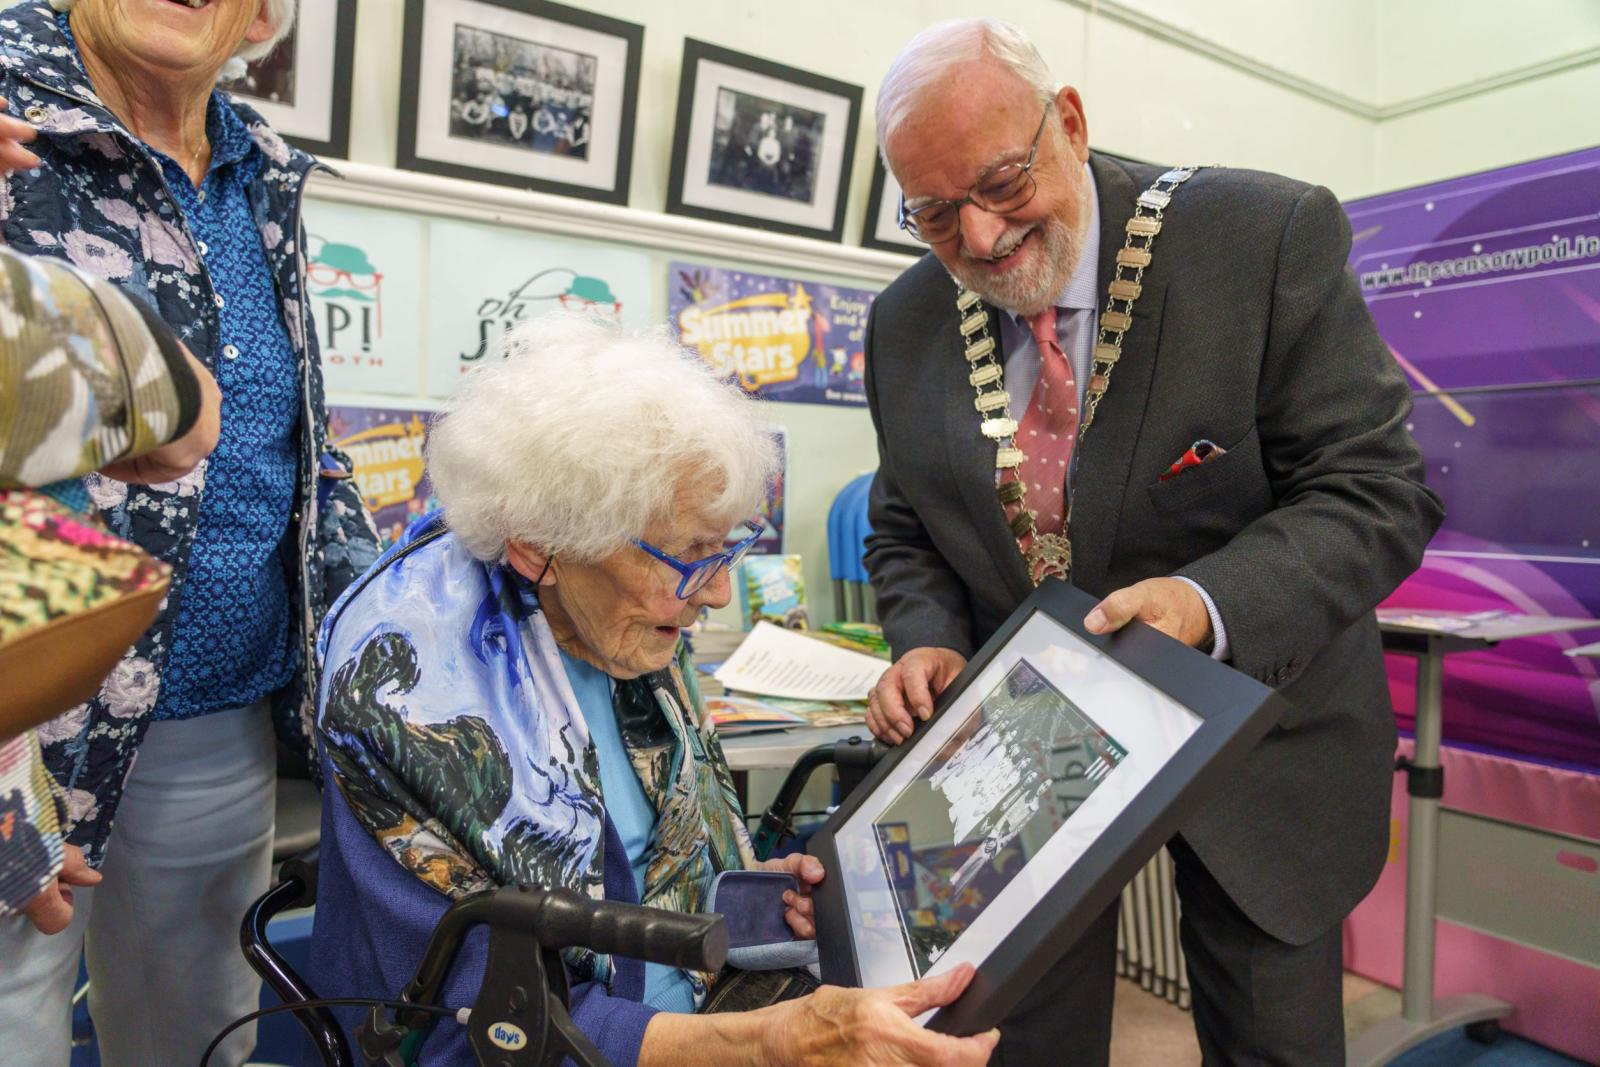 Ita Murray receiving a framed image from the Cathaoirleach